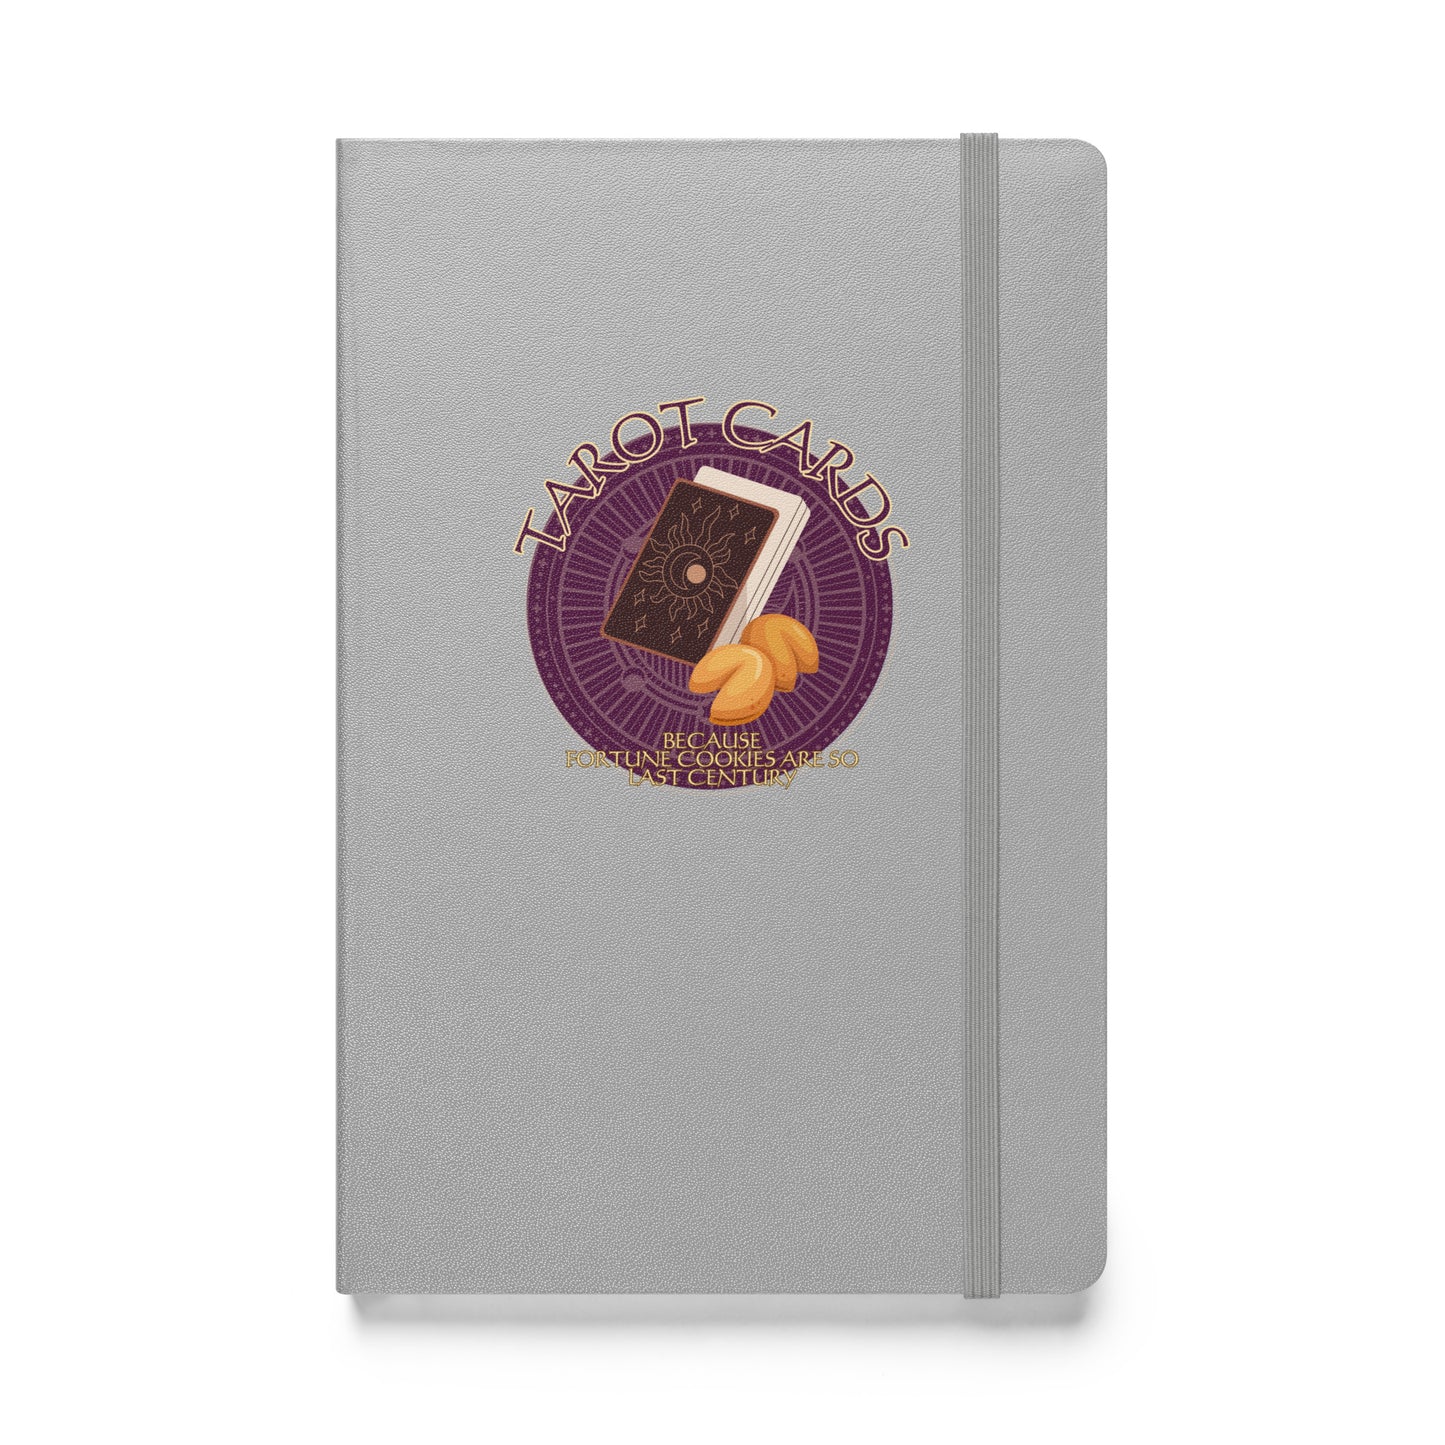 Tarot Cards Because Fortune Cookies Are So Last Century Hardcover bound notebook